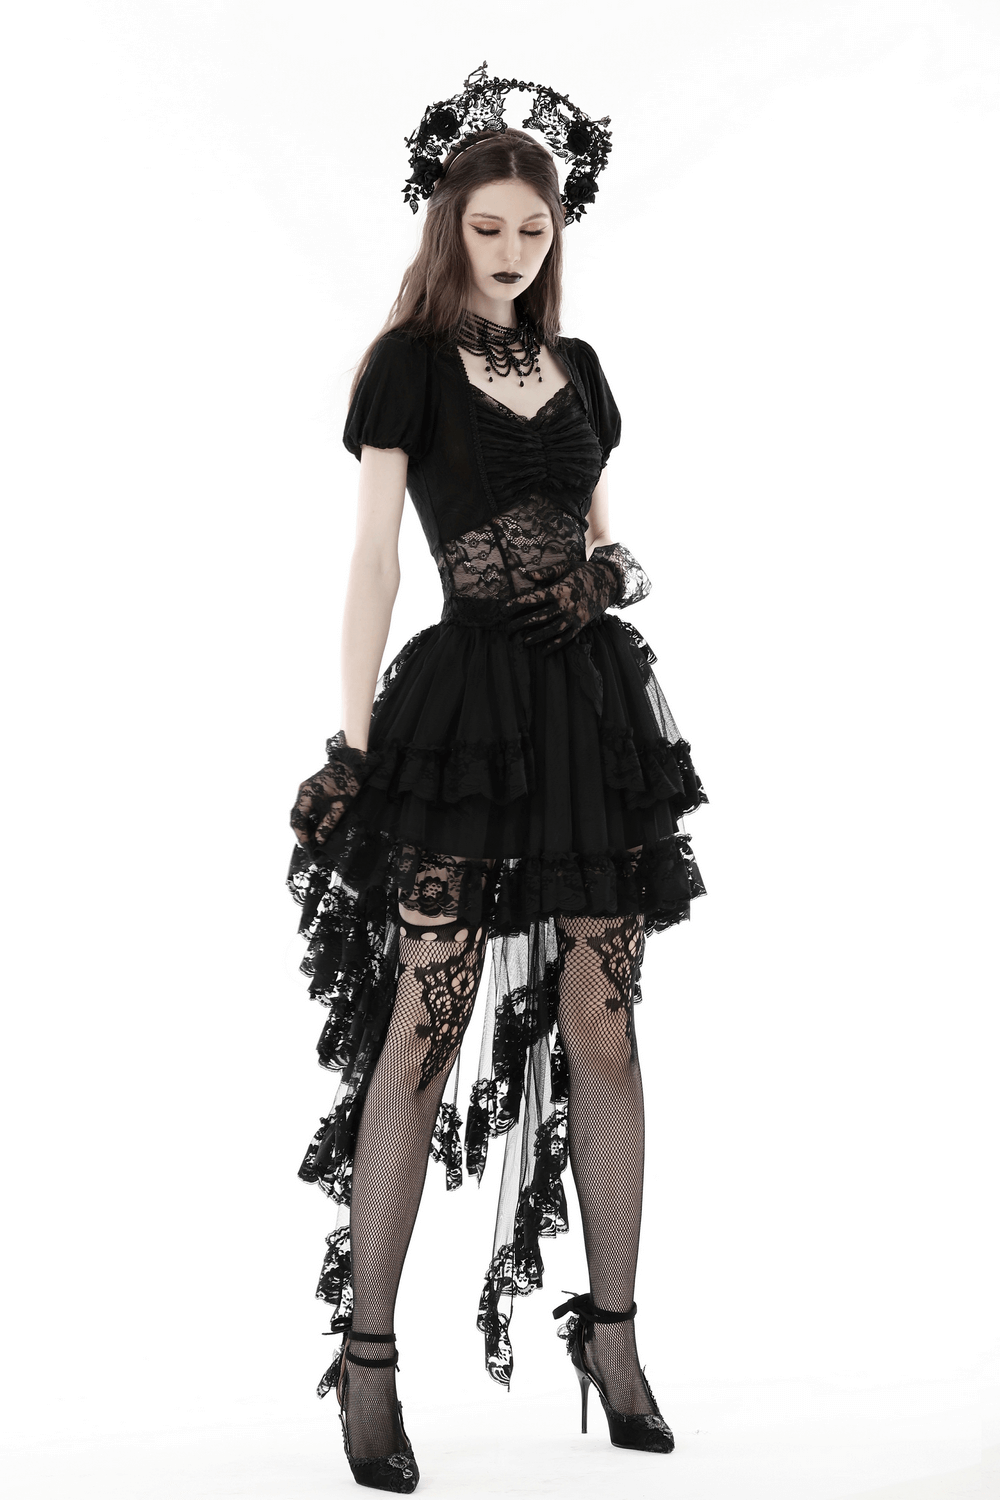 Gothic Lace Hi-Low Skirt with Dramatic Swallowtail Hem